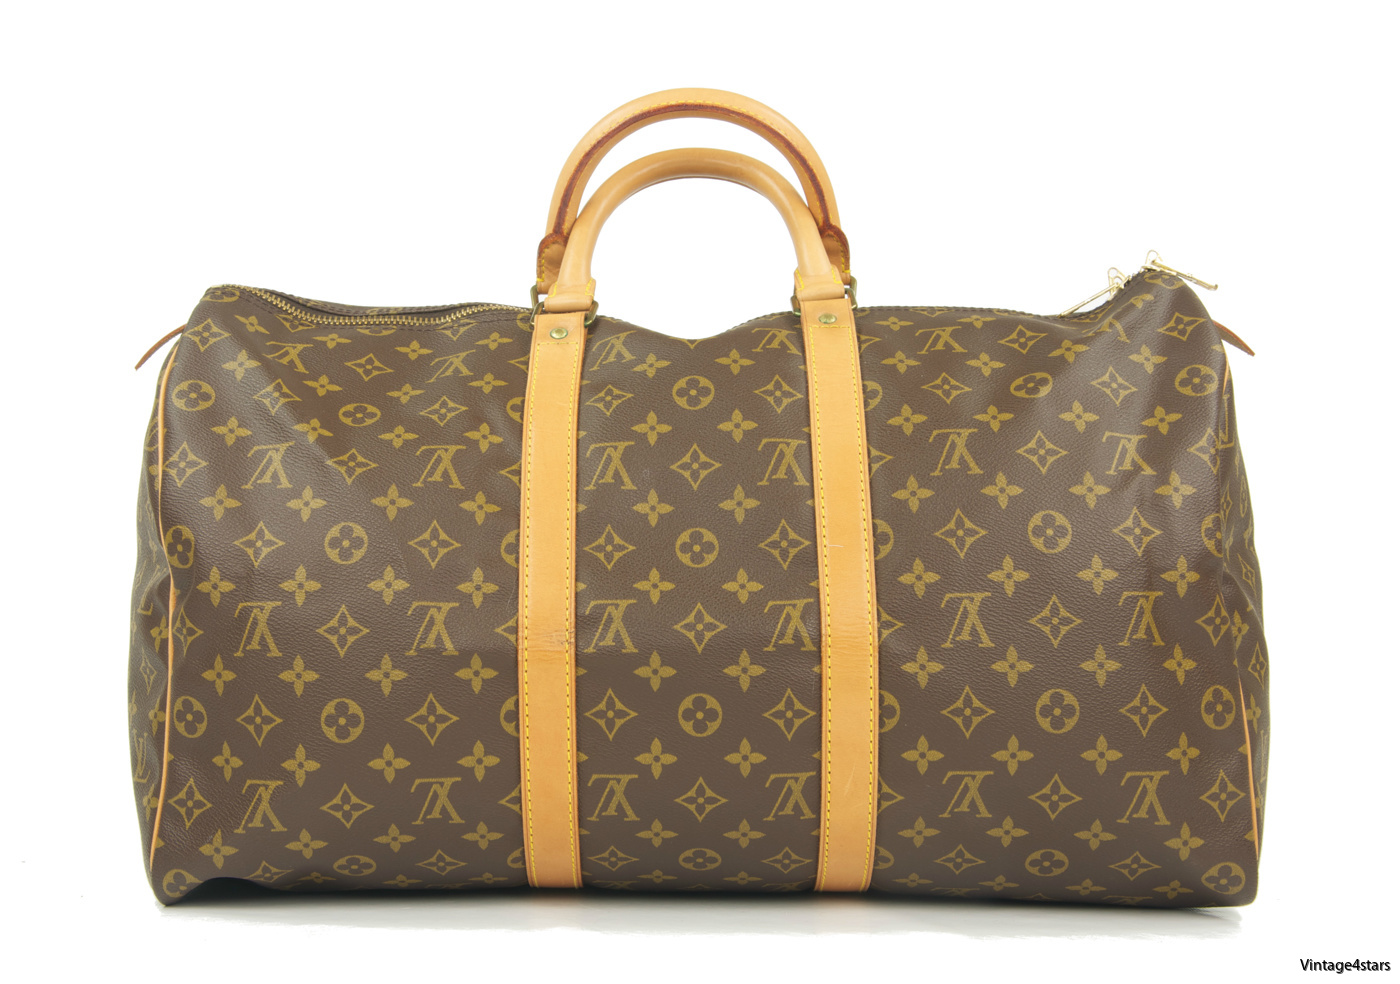 Louis Vuitton Outlet In Pa | Confederated Tribes of the Umatilla Indian Reservation